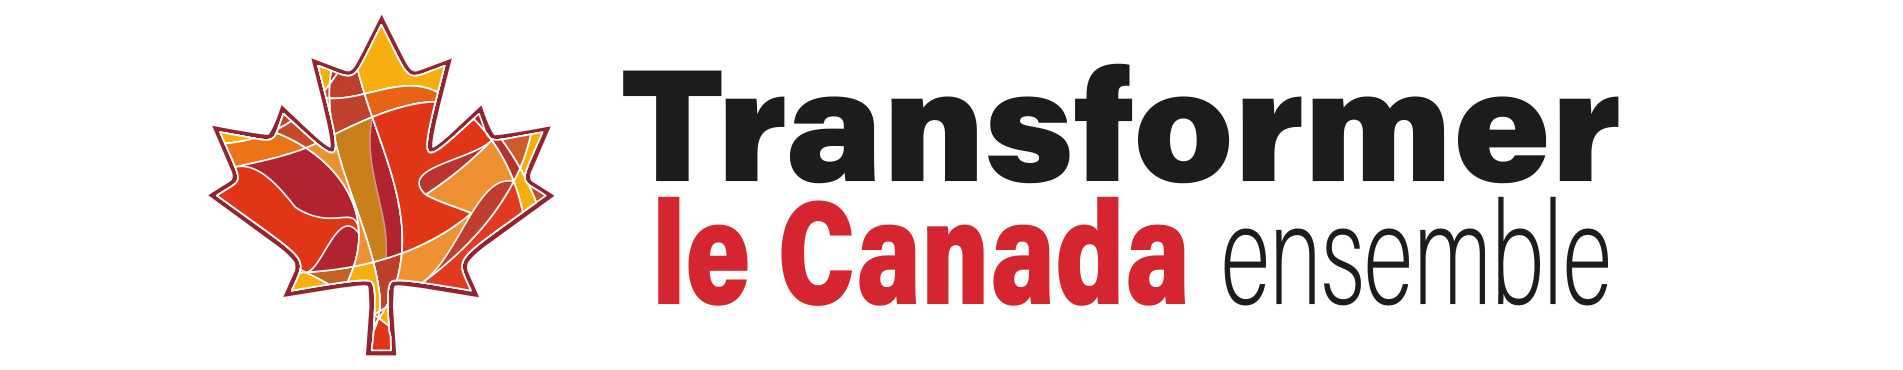 Transforming Canada Together Banner - French